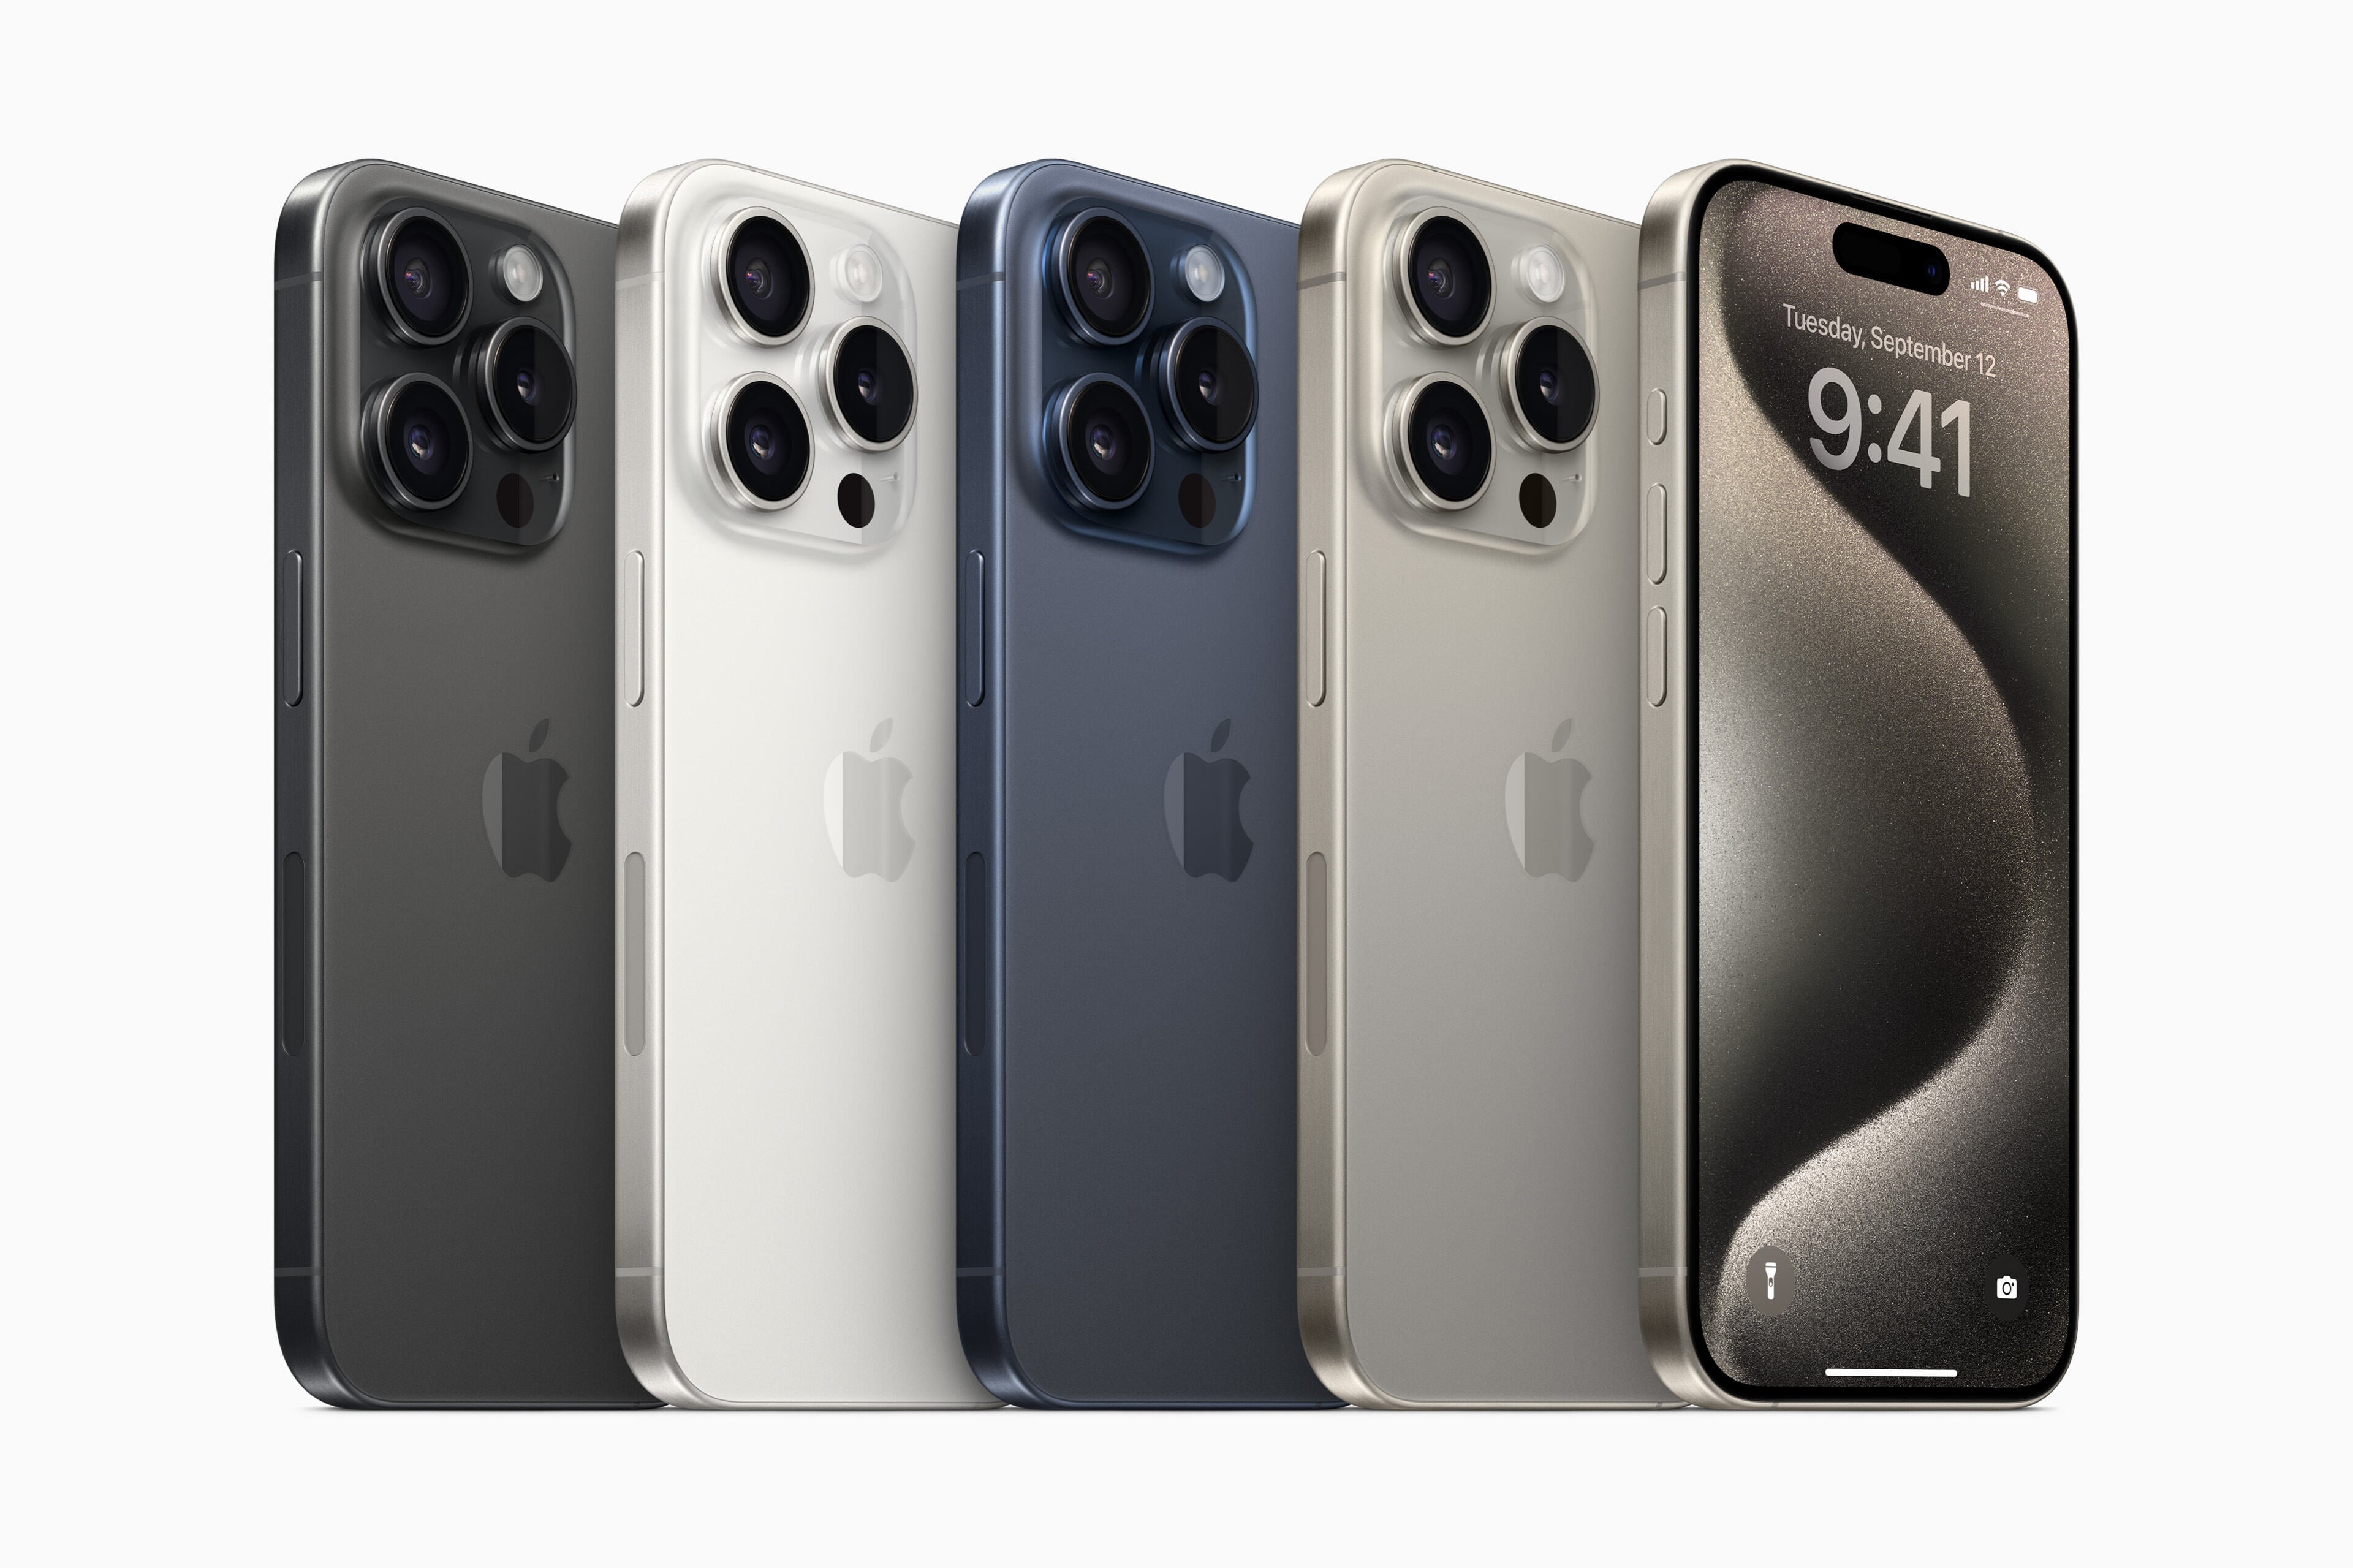 Apple announces iPhone 12 and iPhone 12 mini: A new era for iPhone